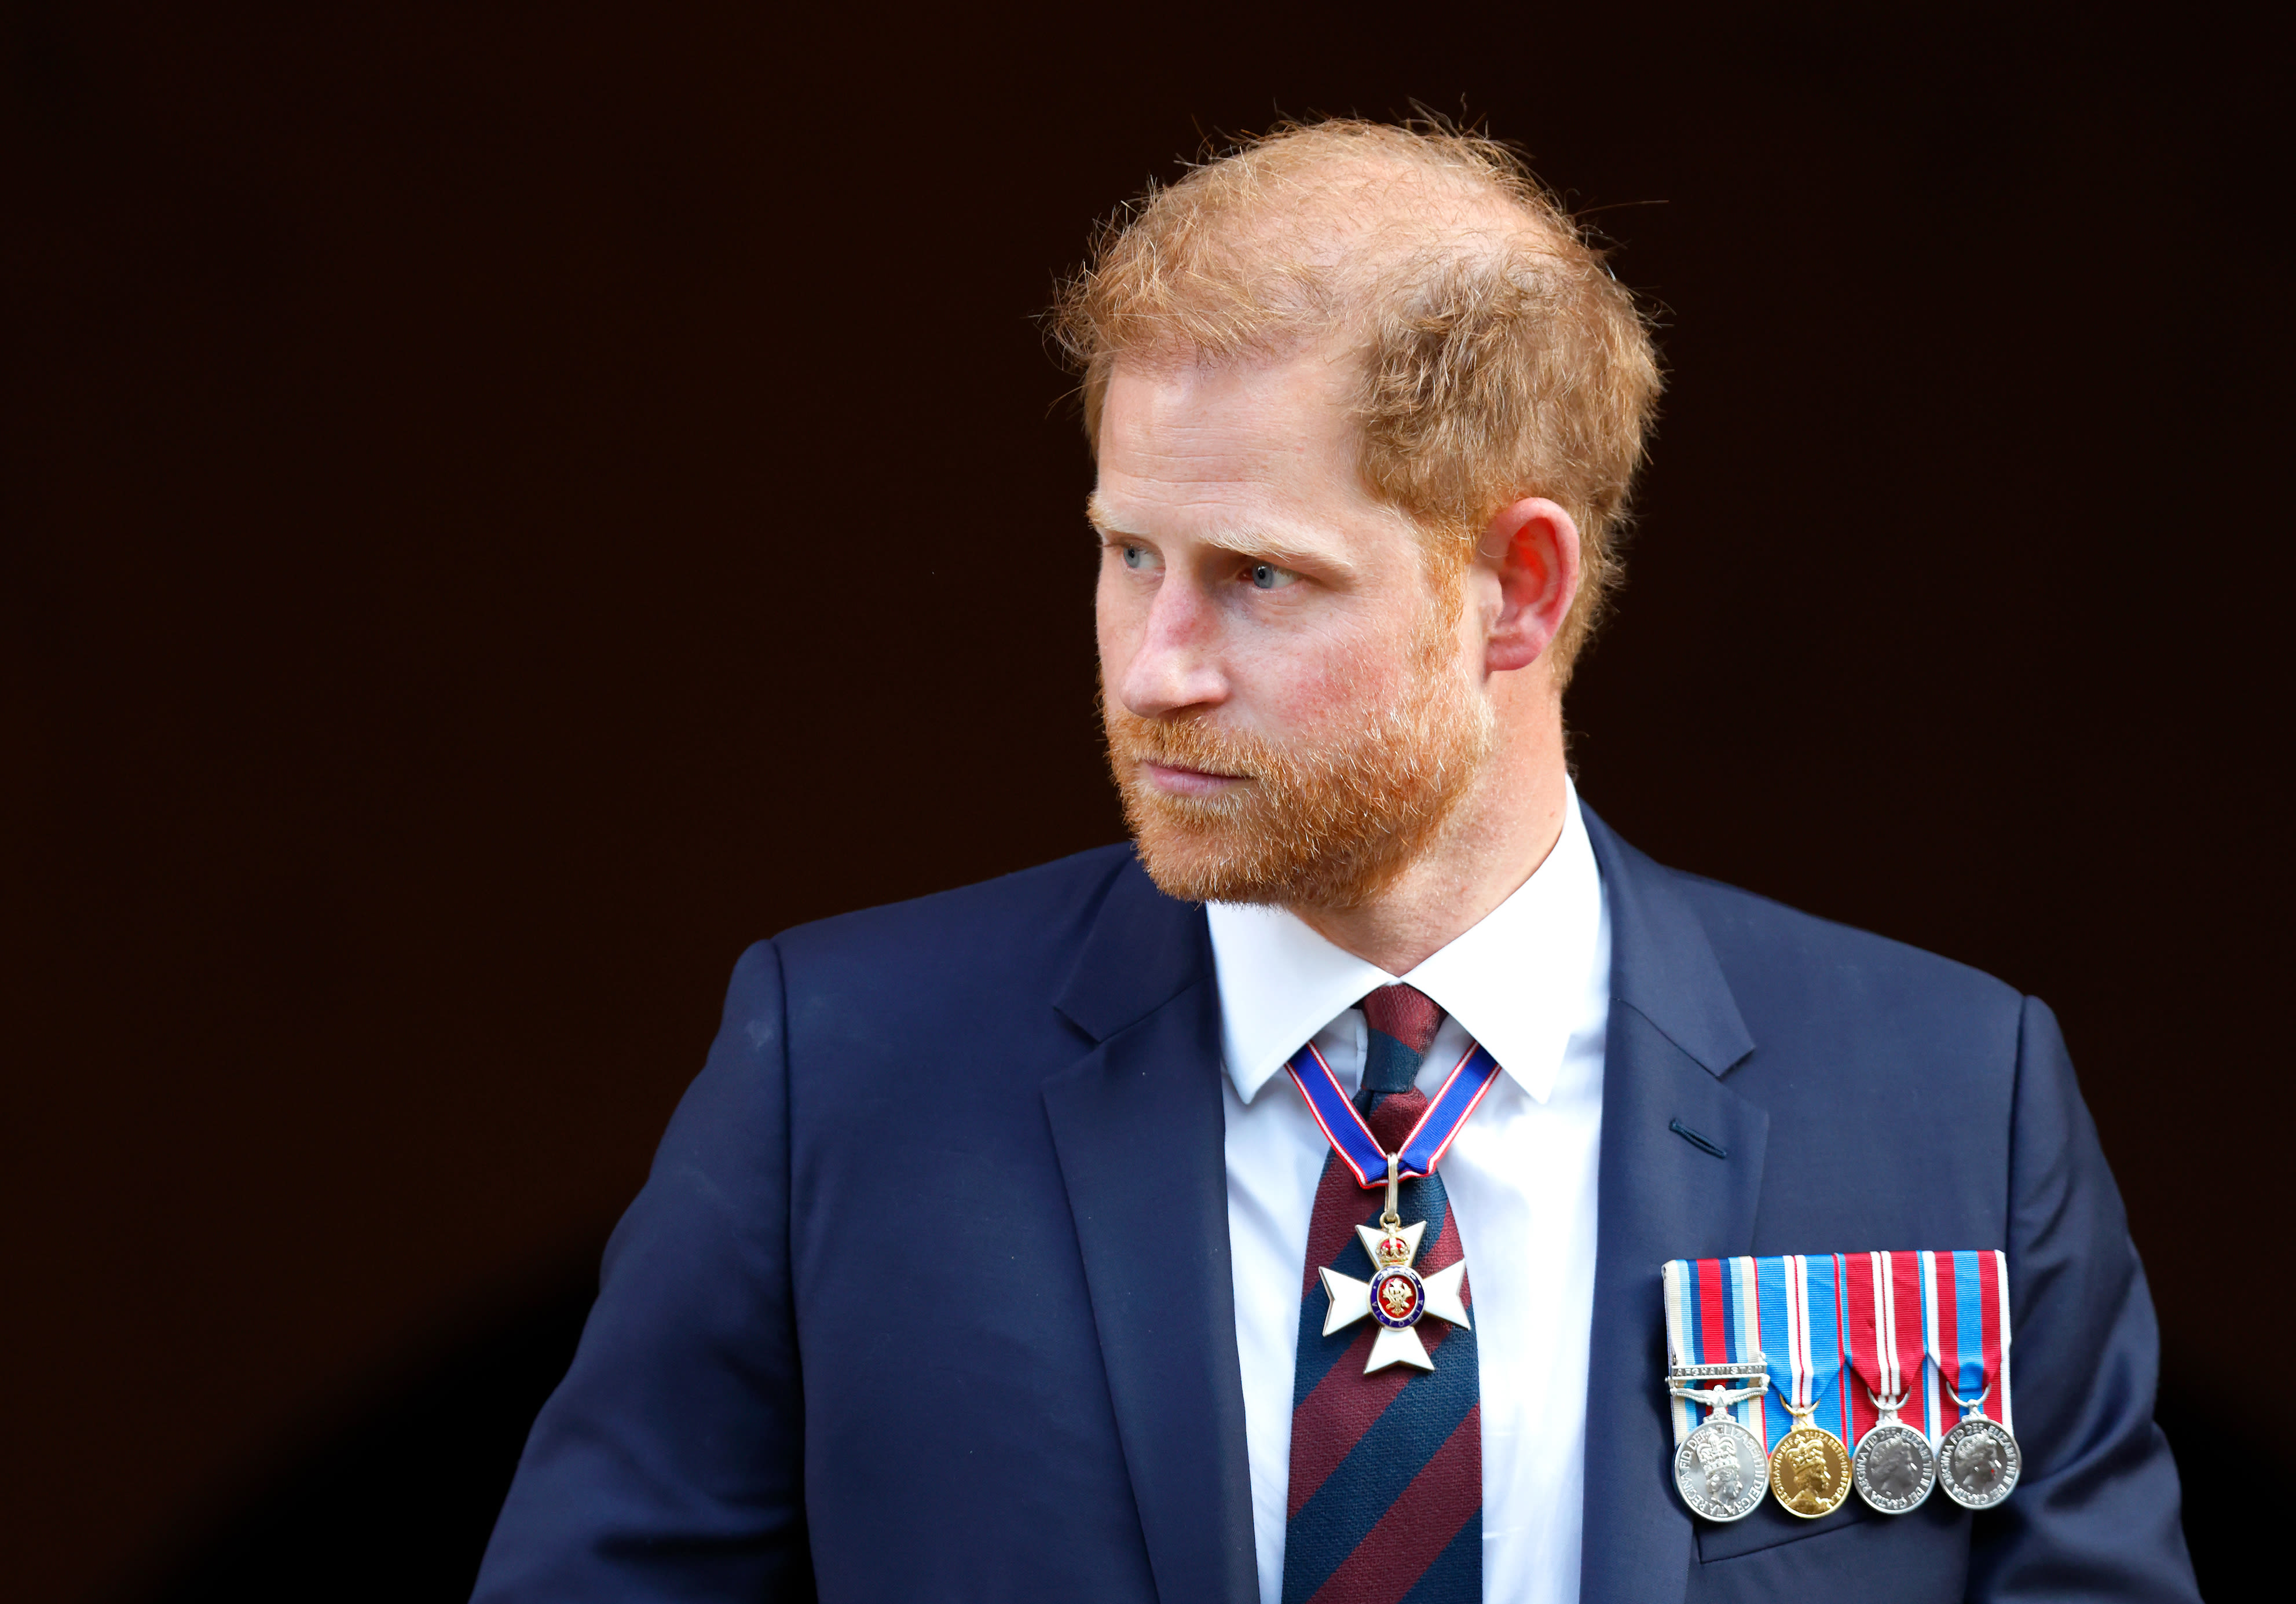 Prince Harry Accused of ‘Deliberately’ Destroying Evidence in Phone Hacking Case